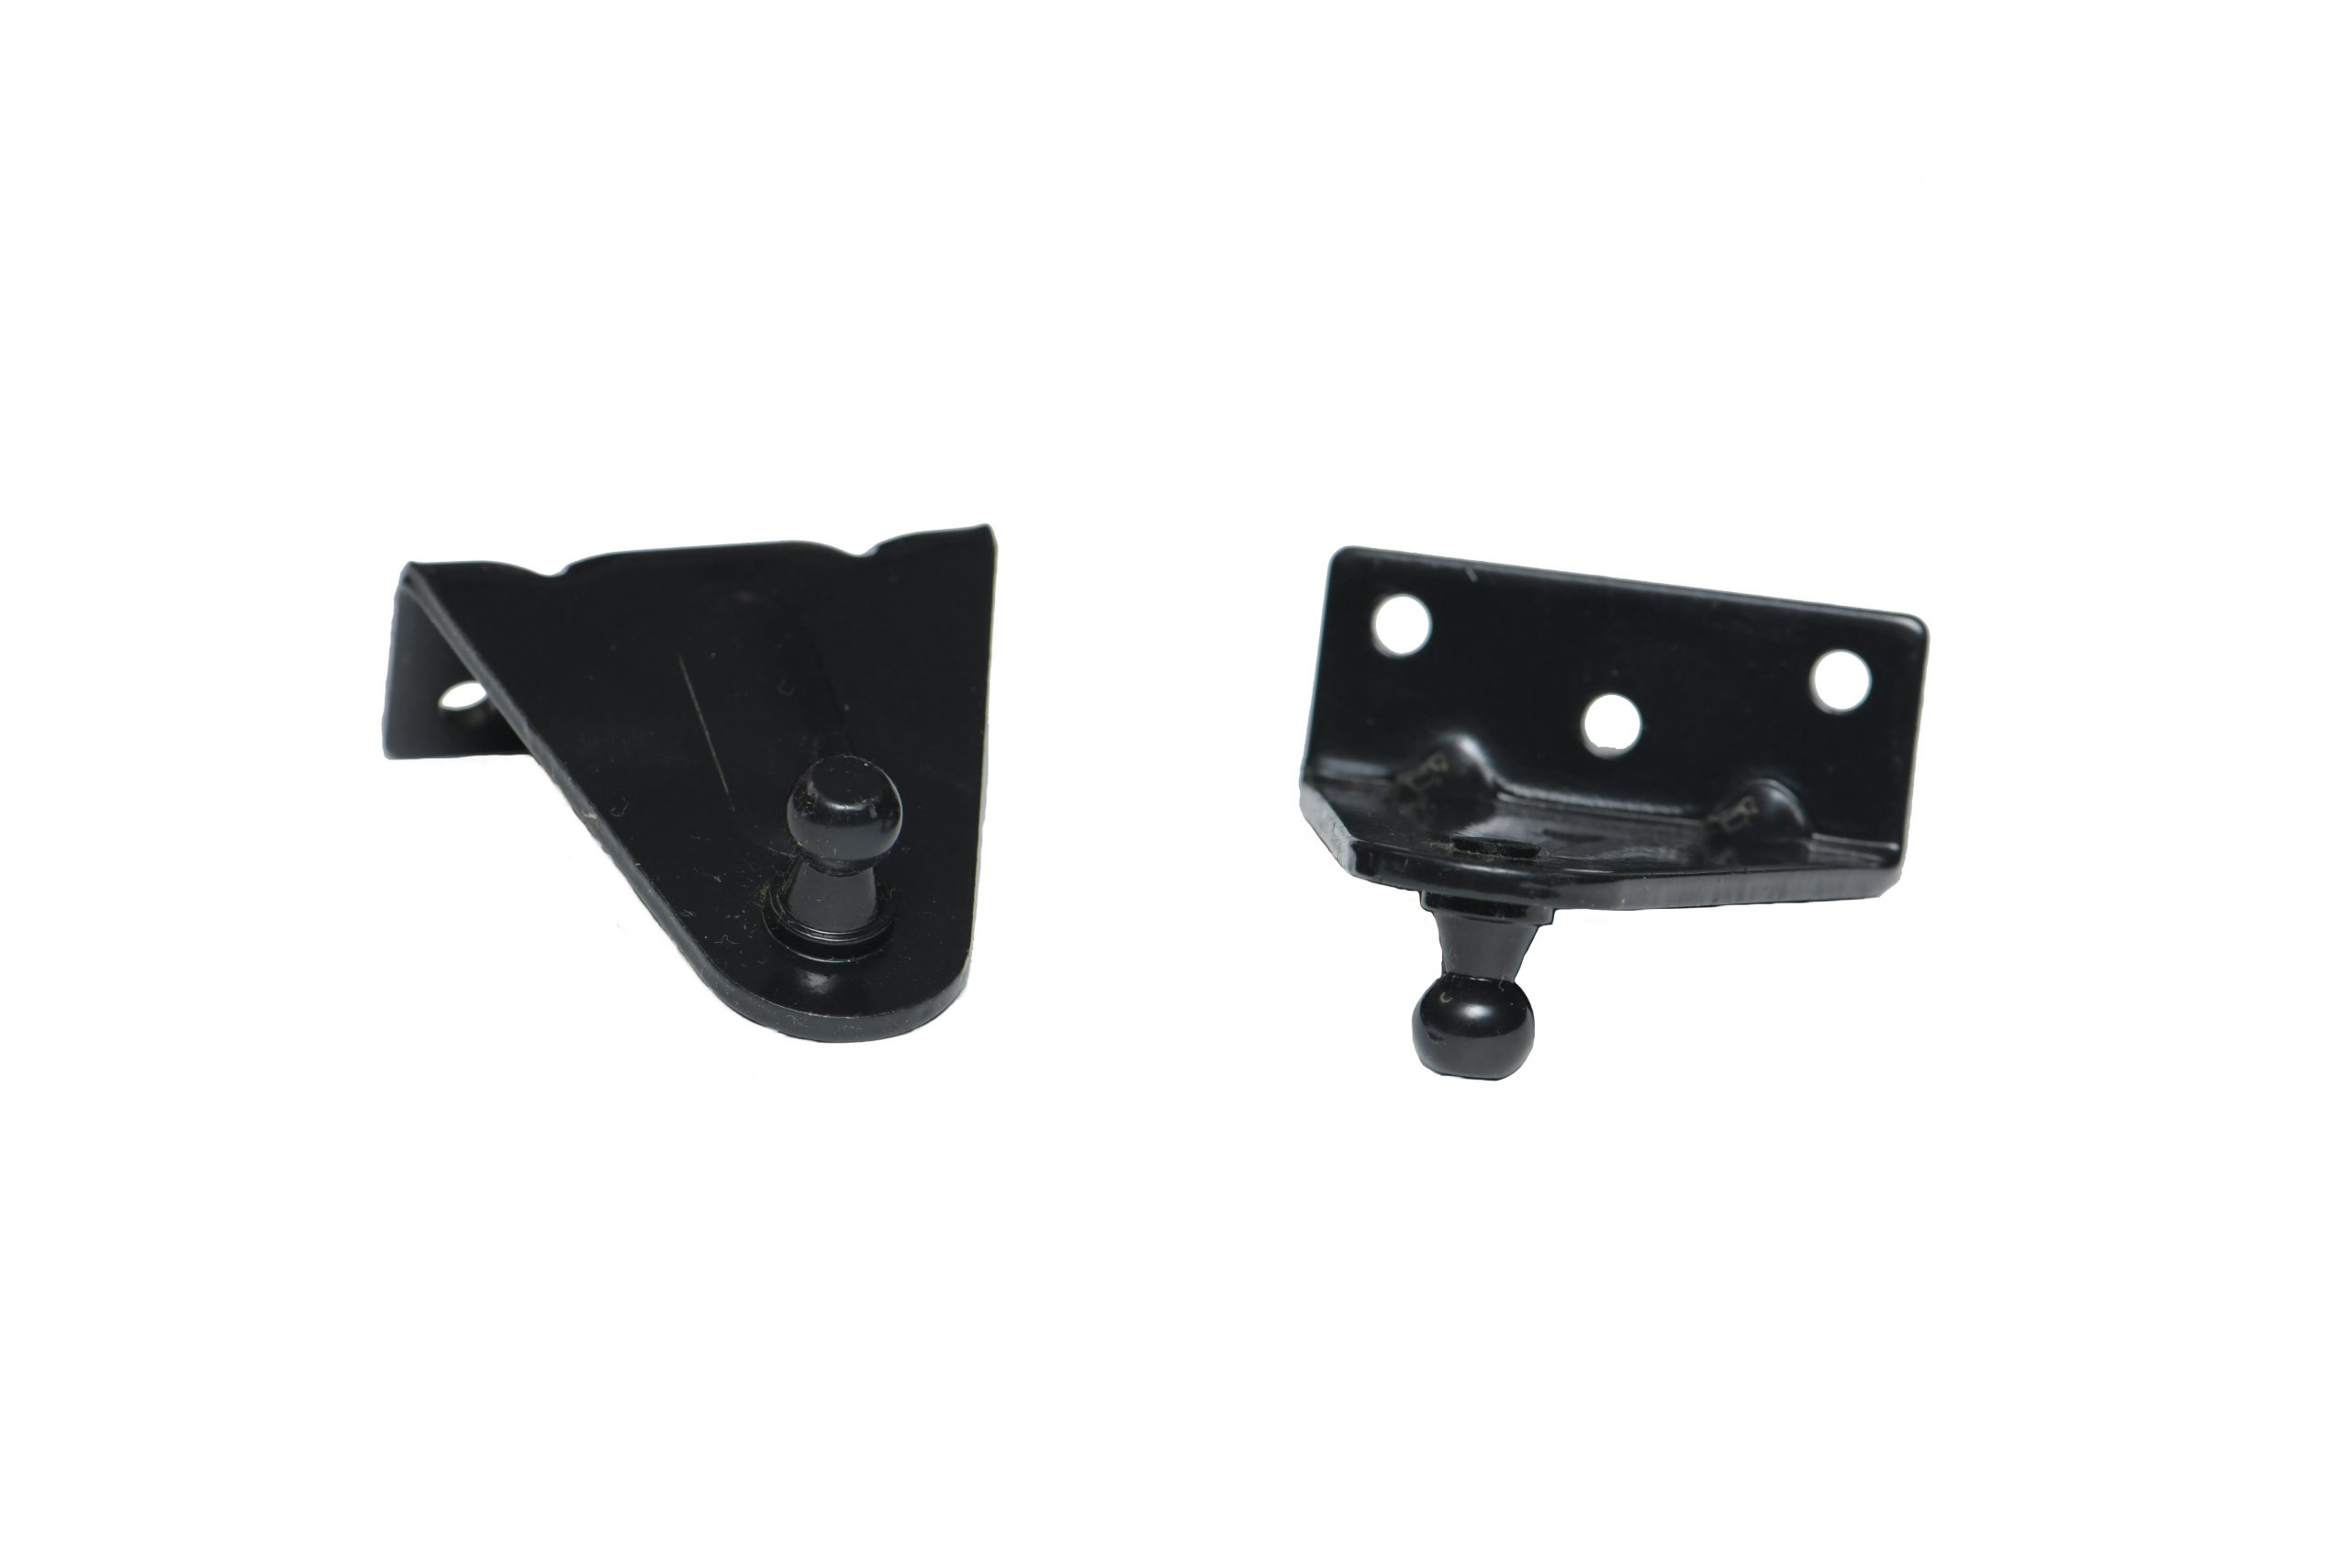 Carbon steel bracket with integrated ball stud